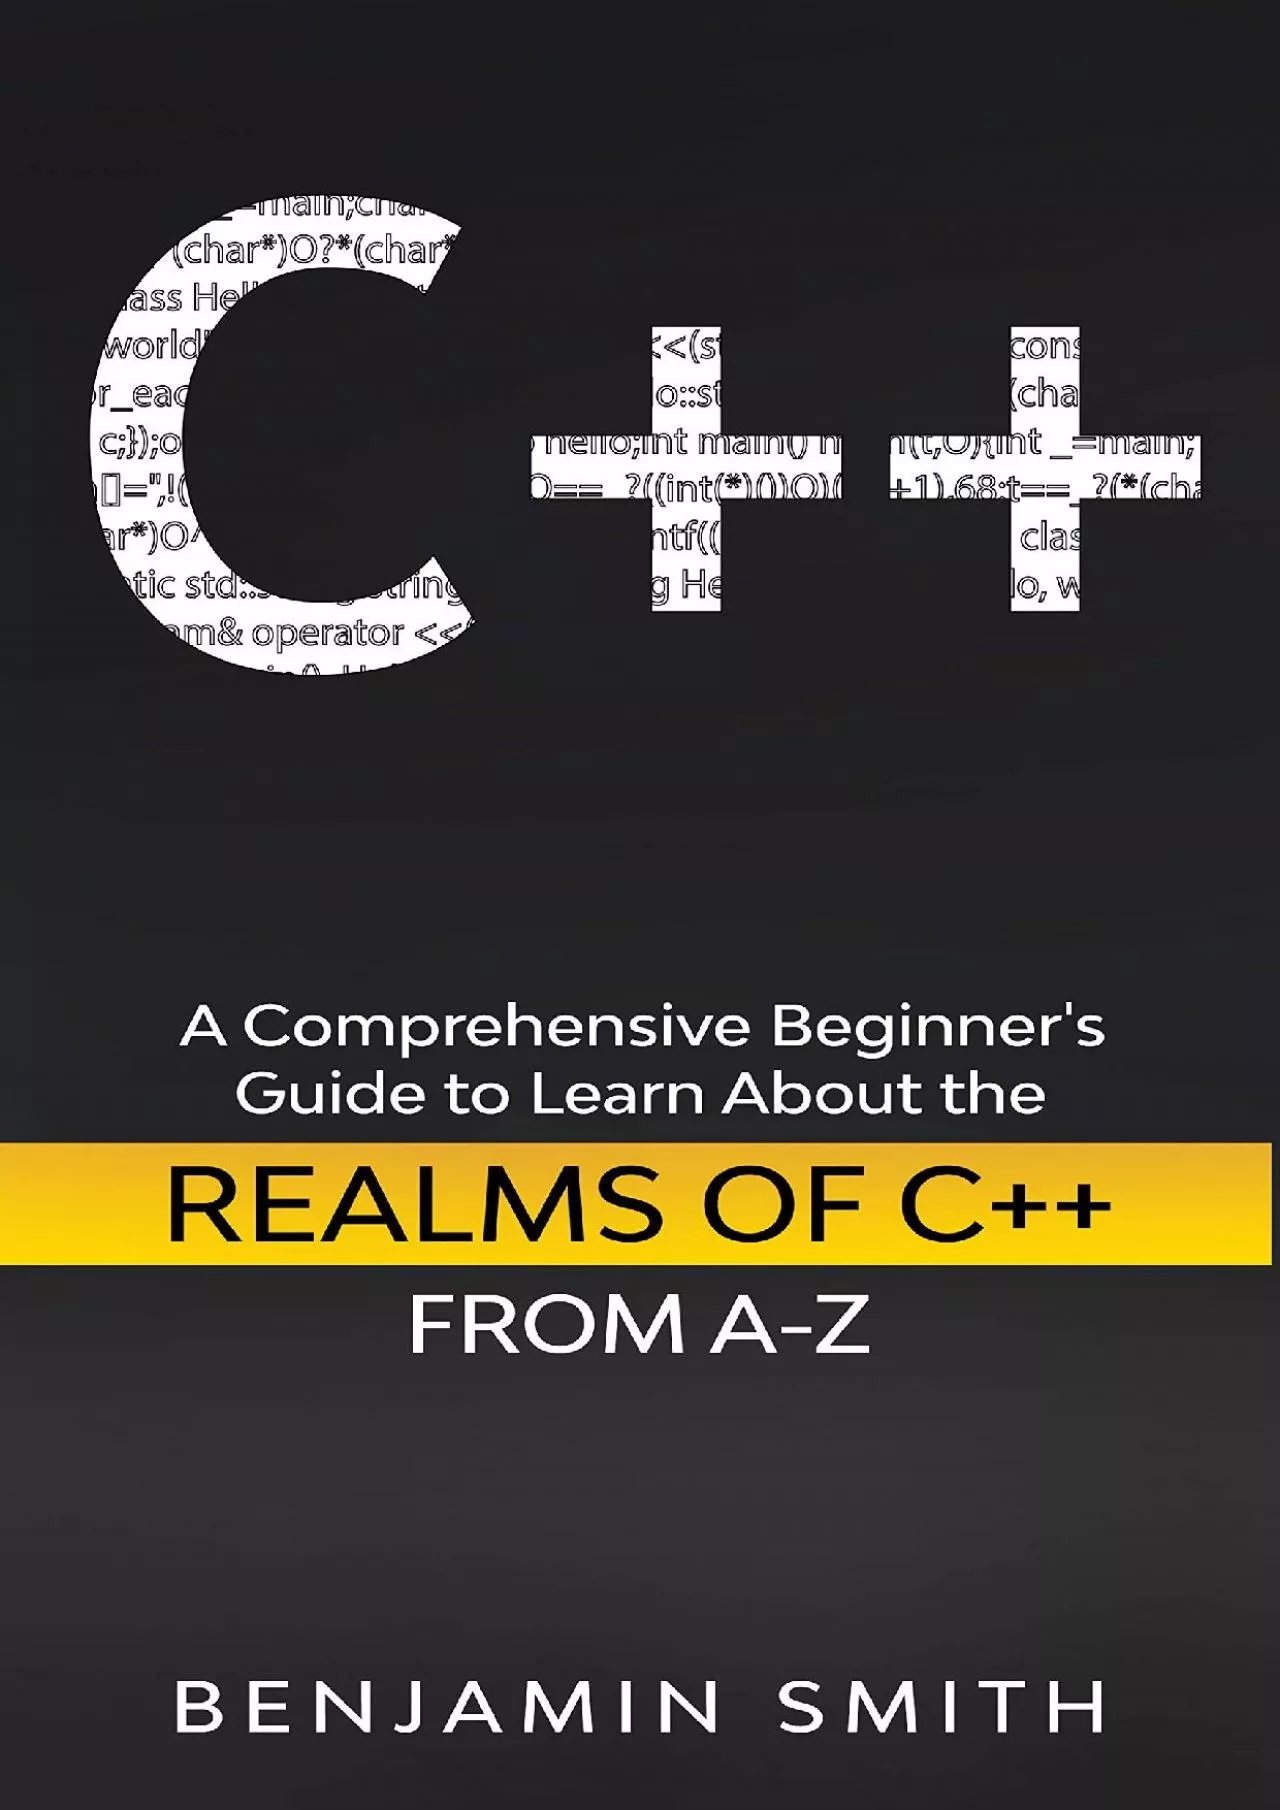 [eBOOK]-C++: A Comprehensive Beginner’s Guide to Learn About the Realms of C++ From